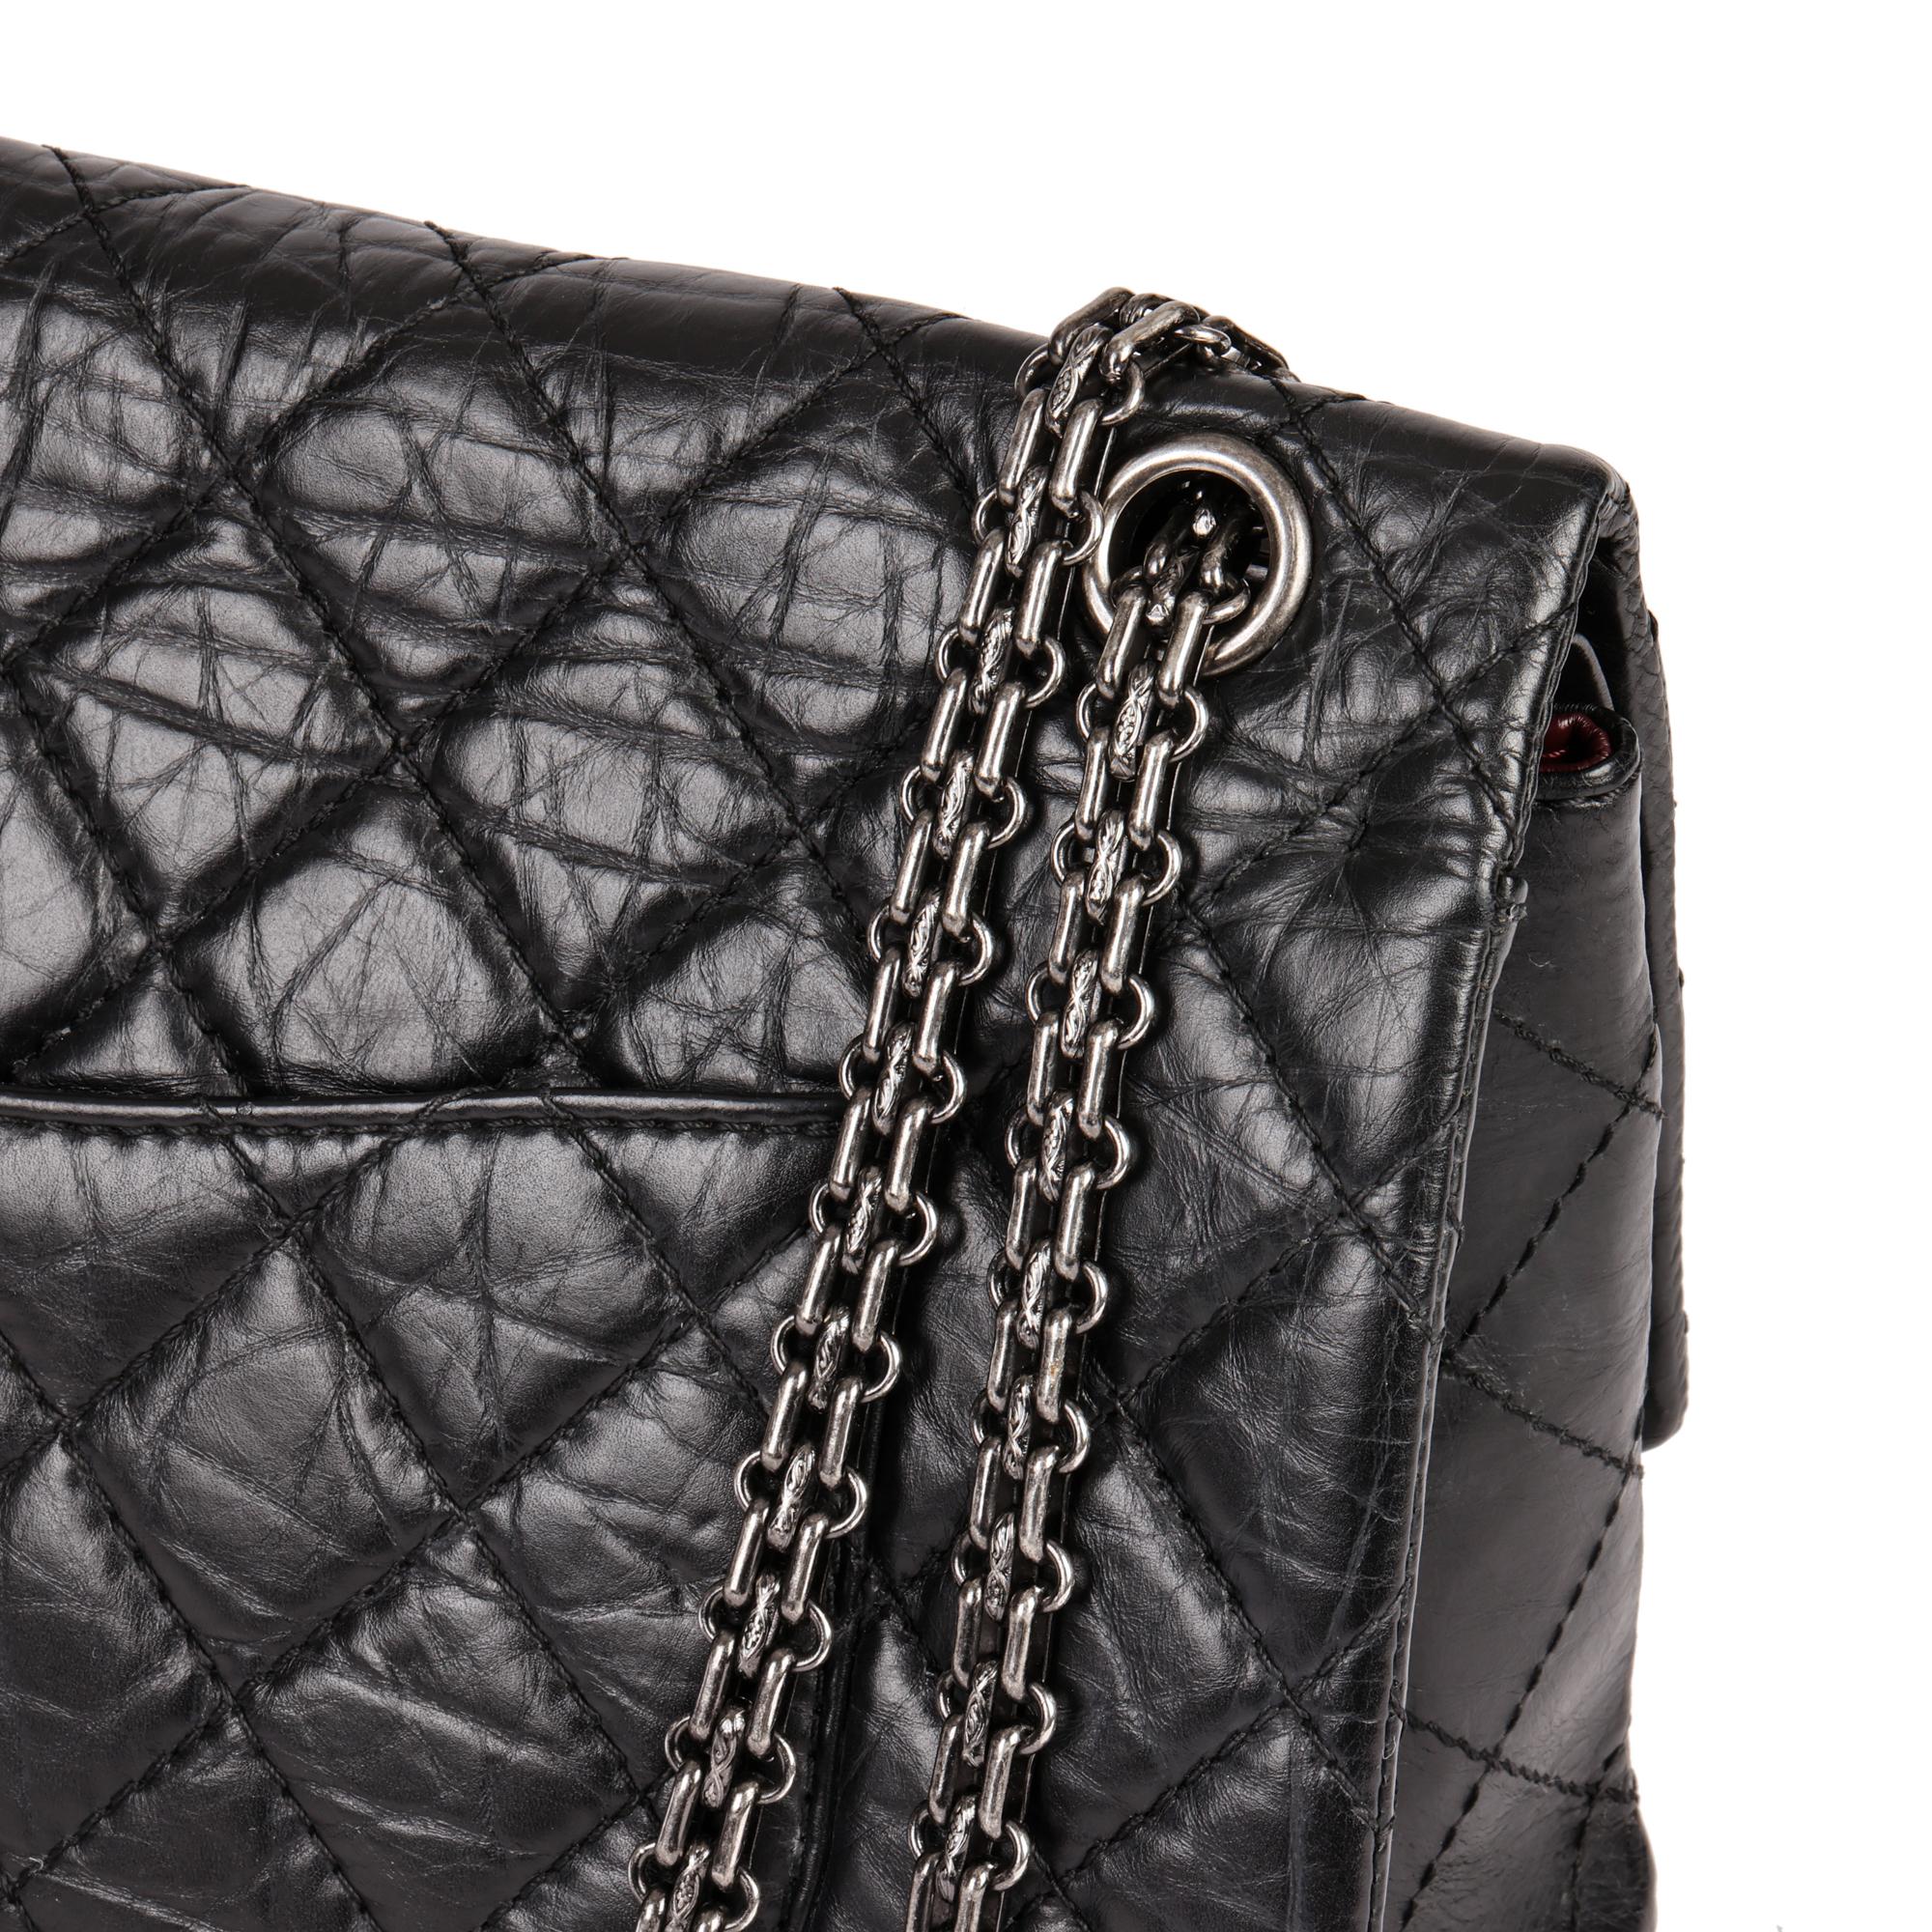 CHANEL Black Aged Calfskin Leather 226 2.55 Reissue Double Flap Bag 4